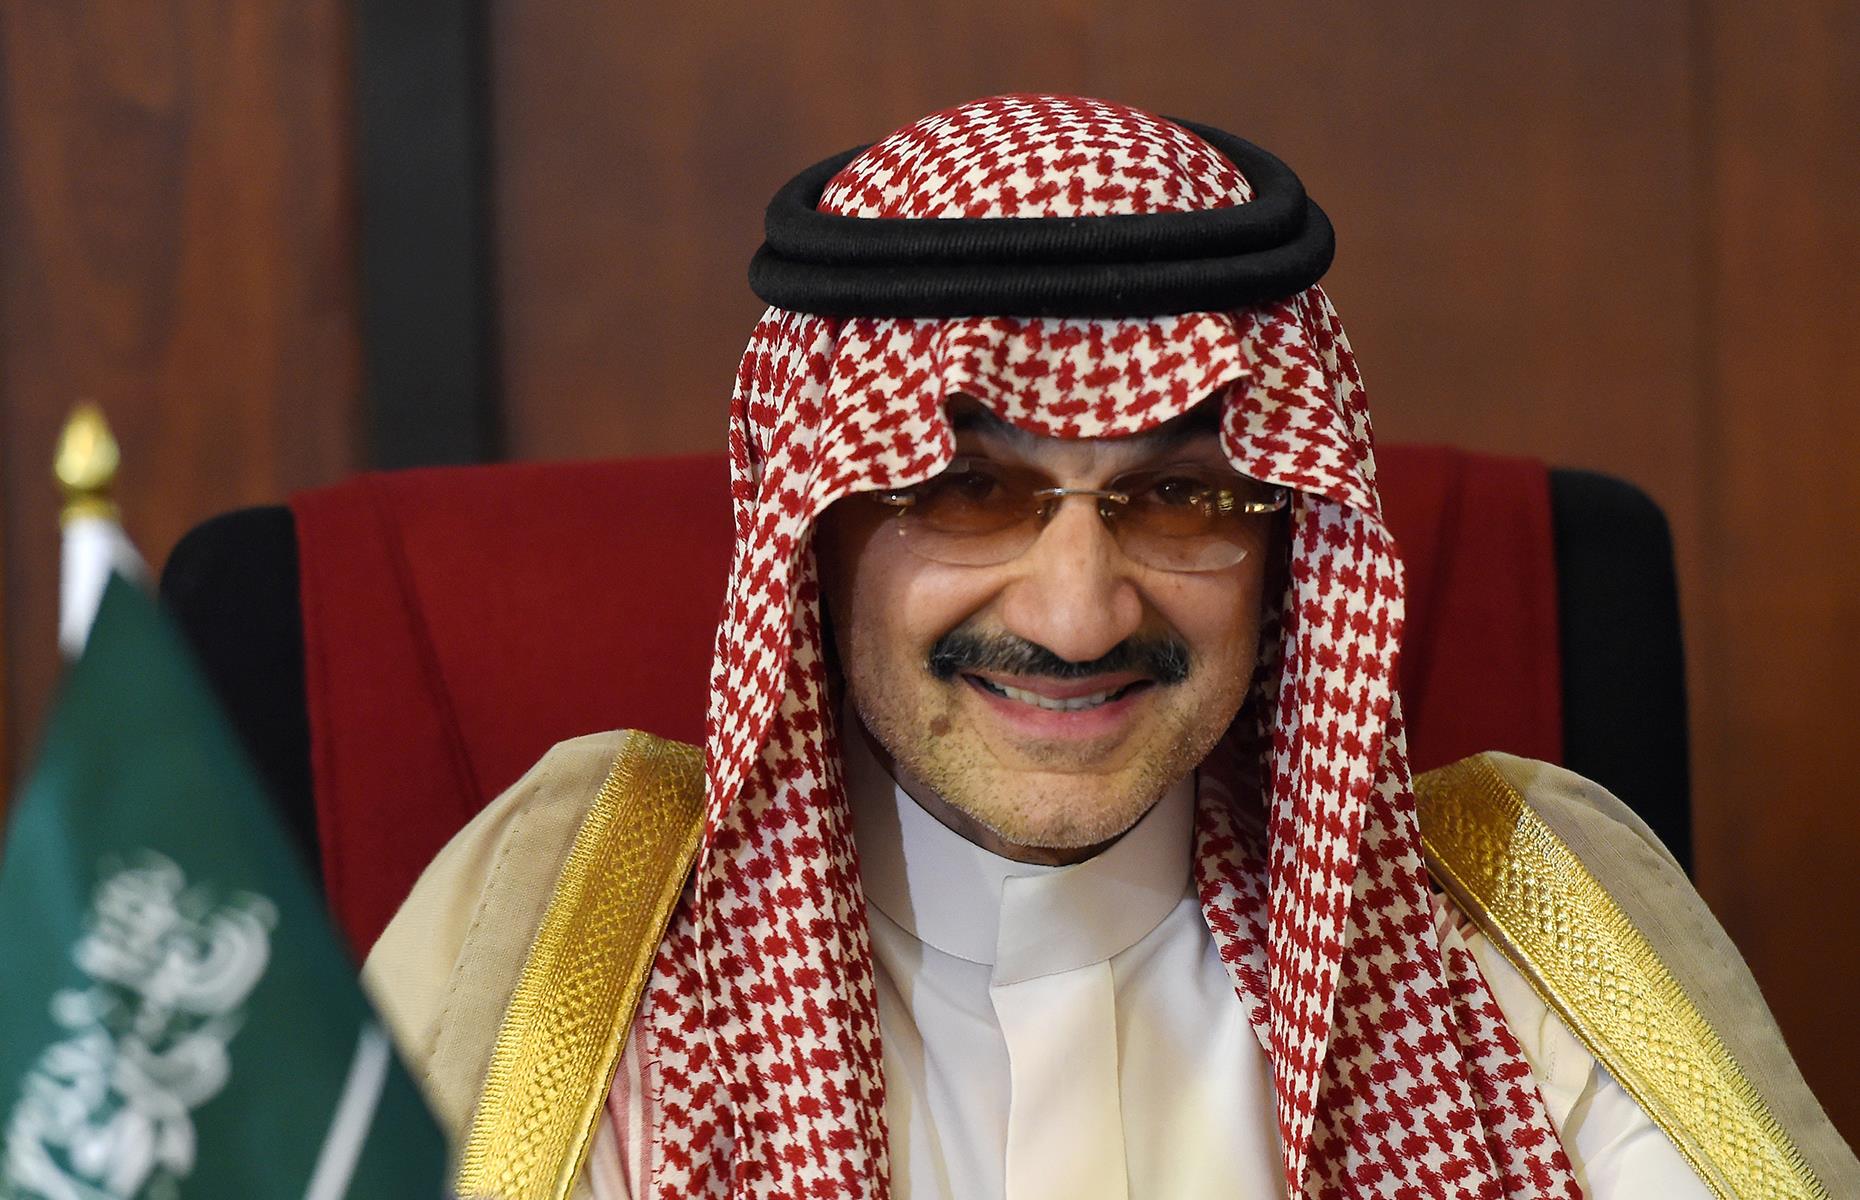 <p>Prince Al-Waleed bin Talal bin Abdulaziz al Saud didn't get his A380 "flying palace" in the end, but there's no need to worry – he still travels in luxury.</p>  <p>He owns a Boeing 747-8 that's likely worth more than $500 million once its various amenities and upgrades have been factored in.</p>  <p>Along with a formal dining area that seats 14 and numerous lounge areas, this made-for-royalty jet even features a throne. </p>